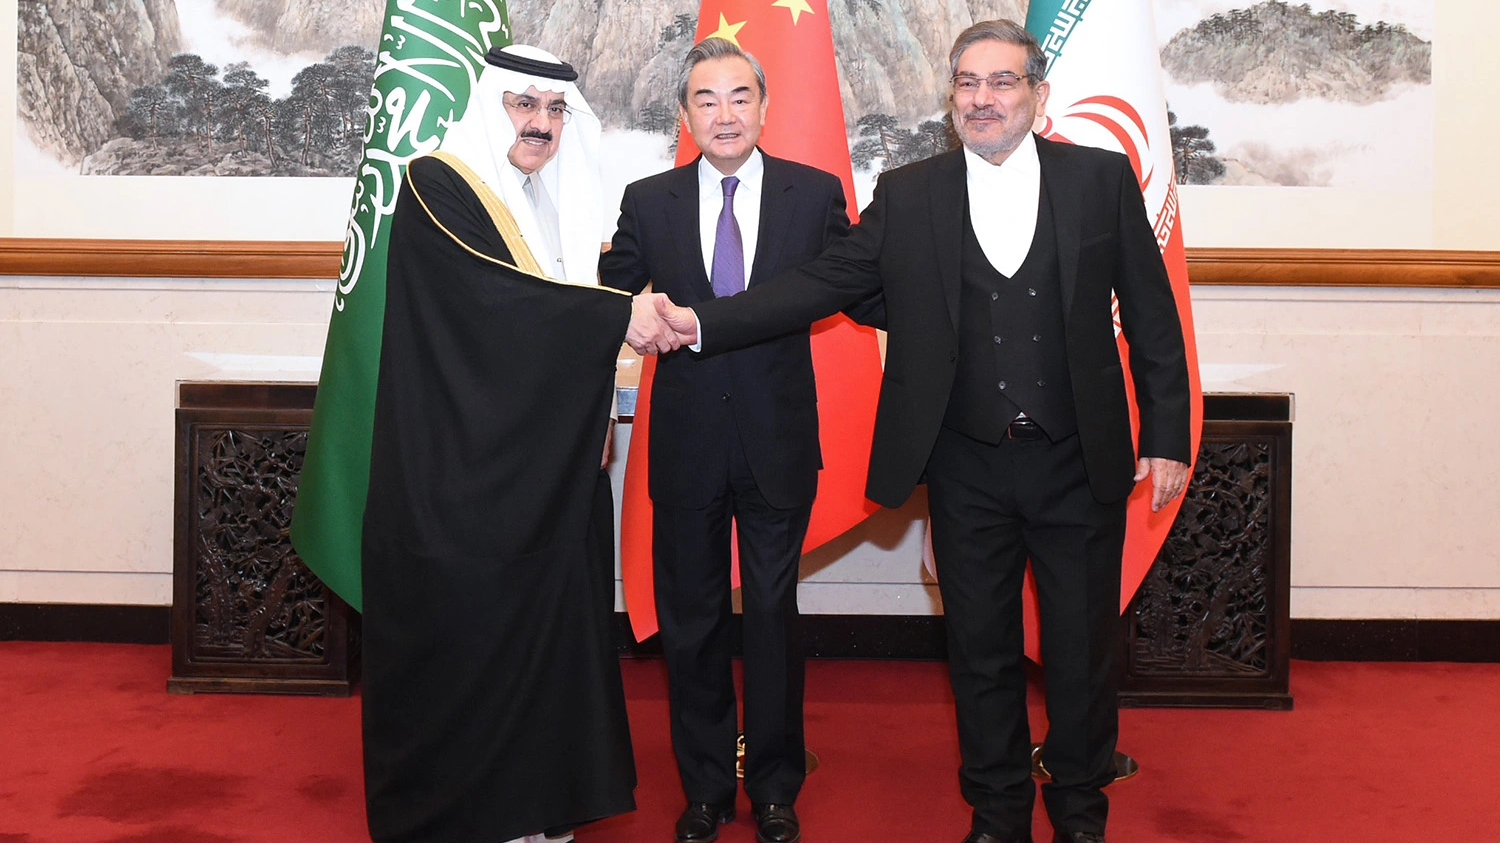 Admiral Ali Shamkhani (R), Secretary of the Supreme National Security Council of Iran, shakes hands with Musaad bin Mohammed Al-Aiban (L), Saudi Arabia's Minister of State, as Wang Yi (C), director of the Office of the Foreign Affairs Commission of the Communist Party of China Central Committee, looks on for a photo during a meeting in Beijing, China, March 10, 2023. /Xinhua